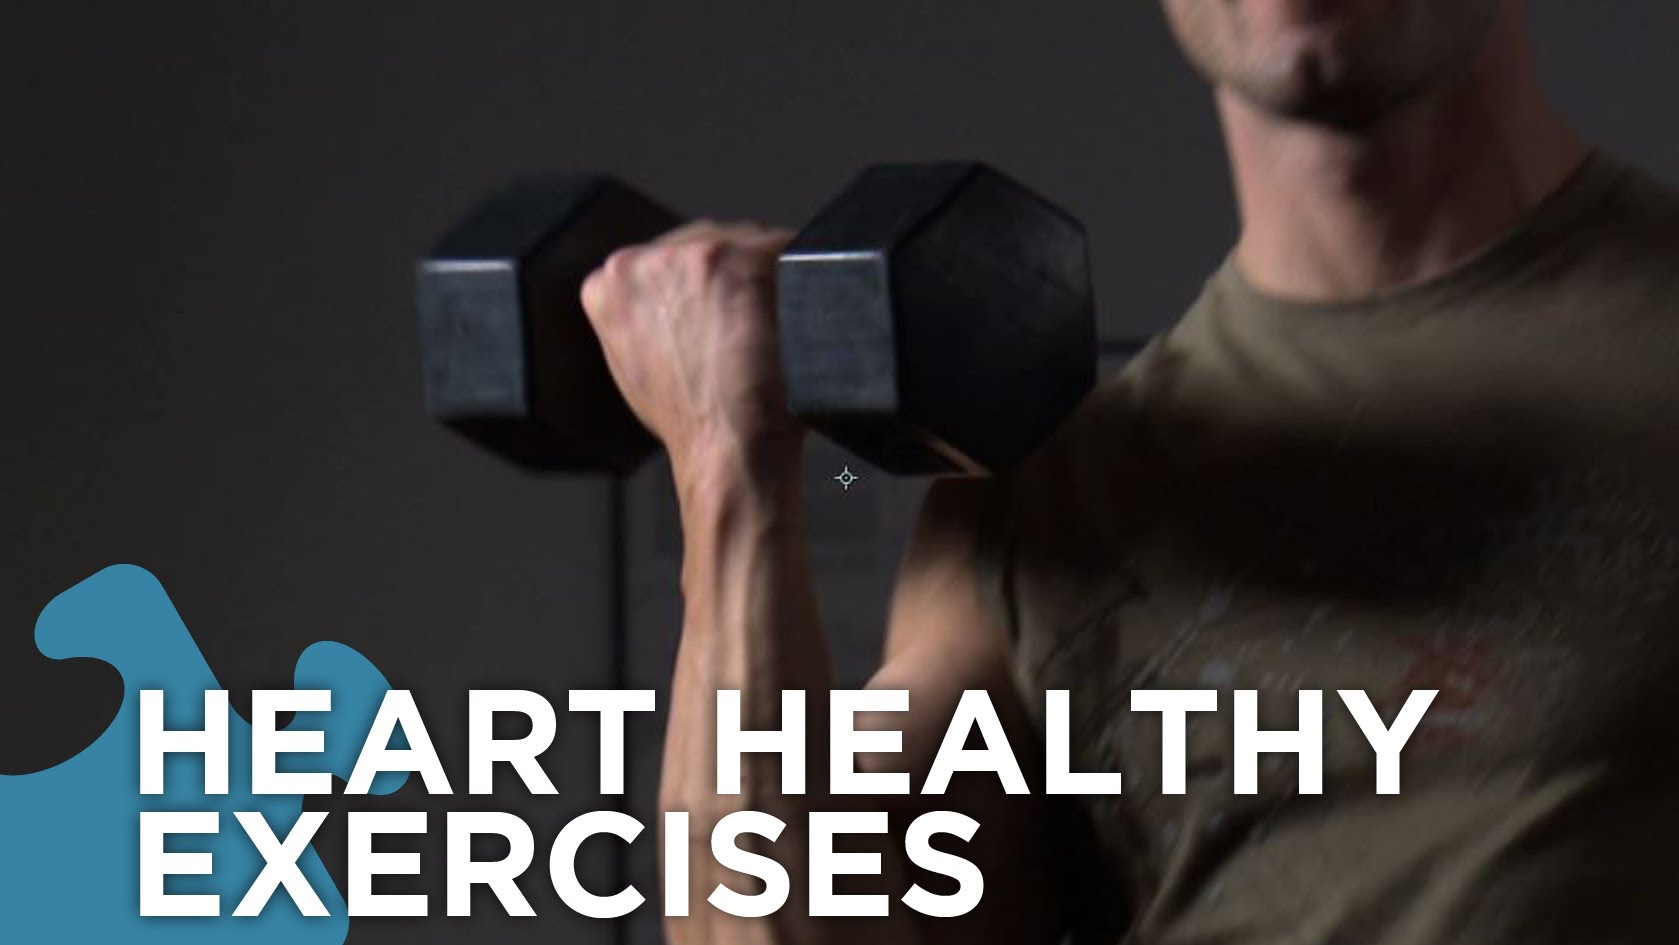 Exercises for the Heart